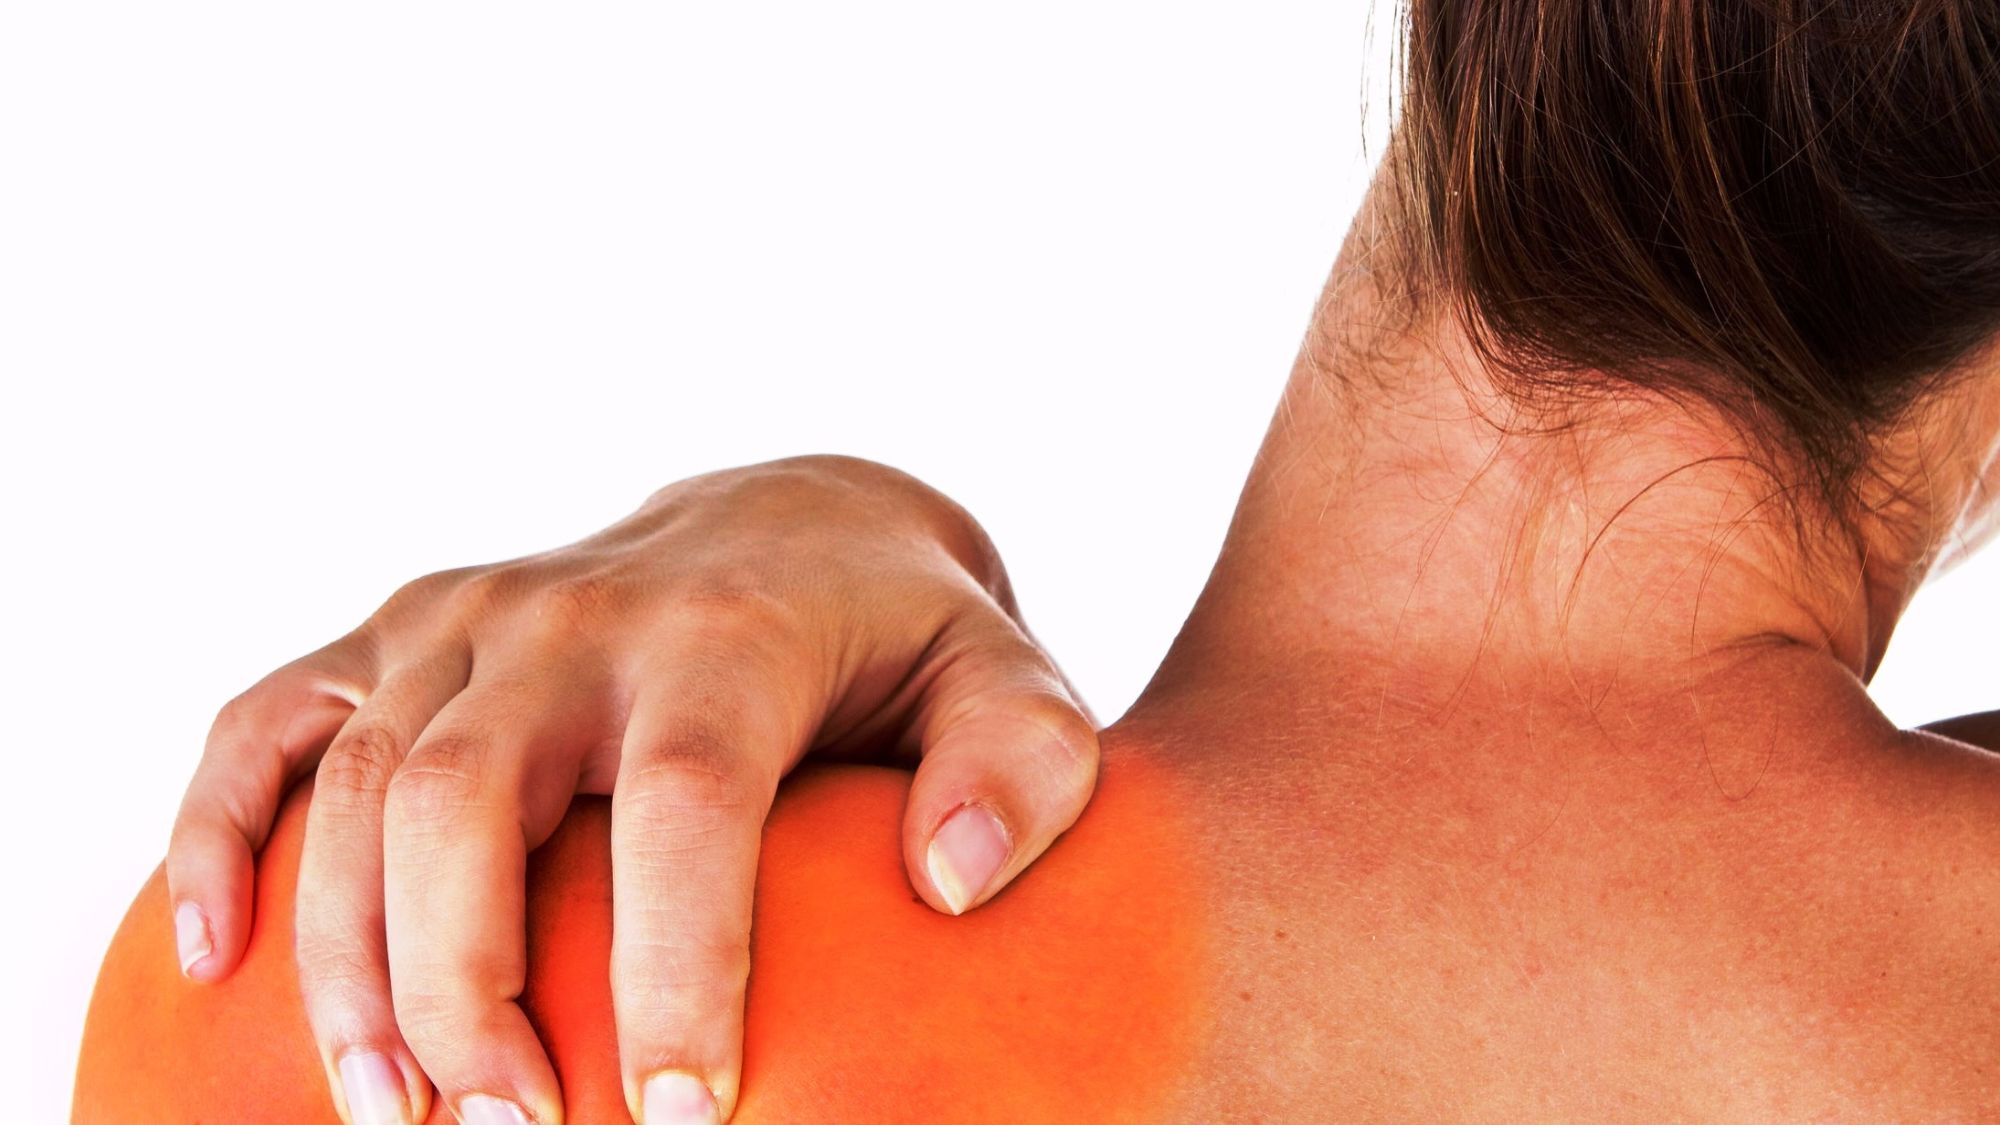 A woman with a scar on her shoulder, indicating shoulder pain